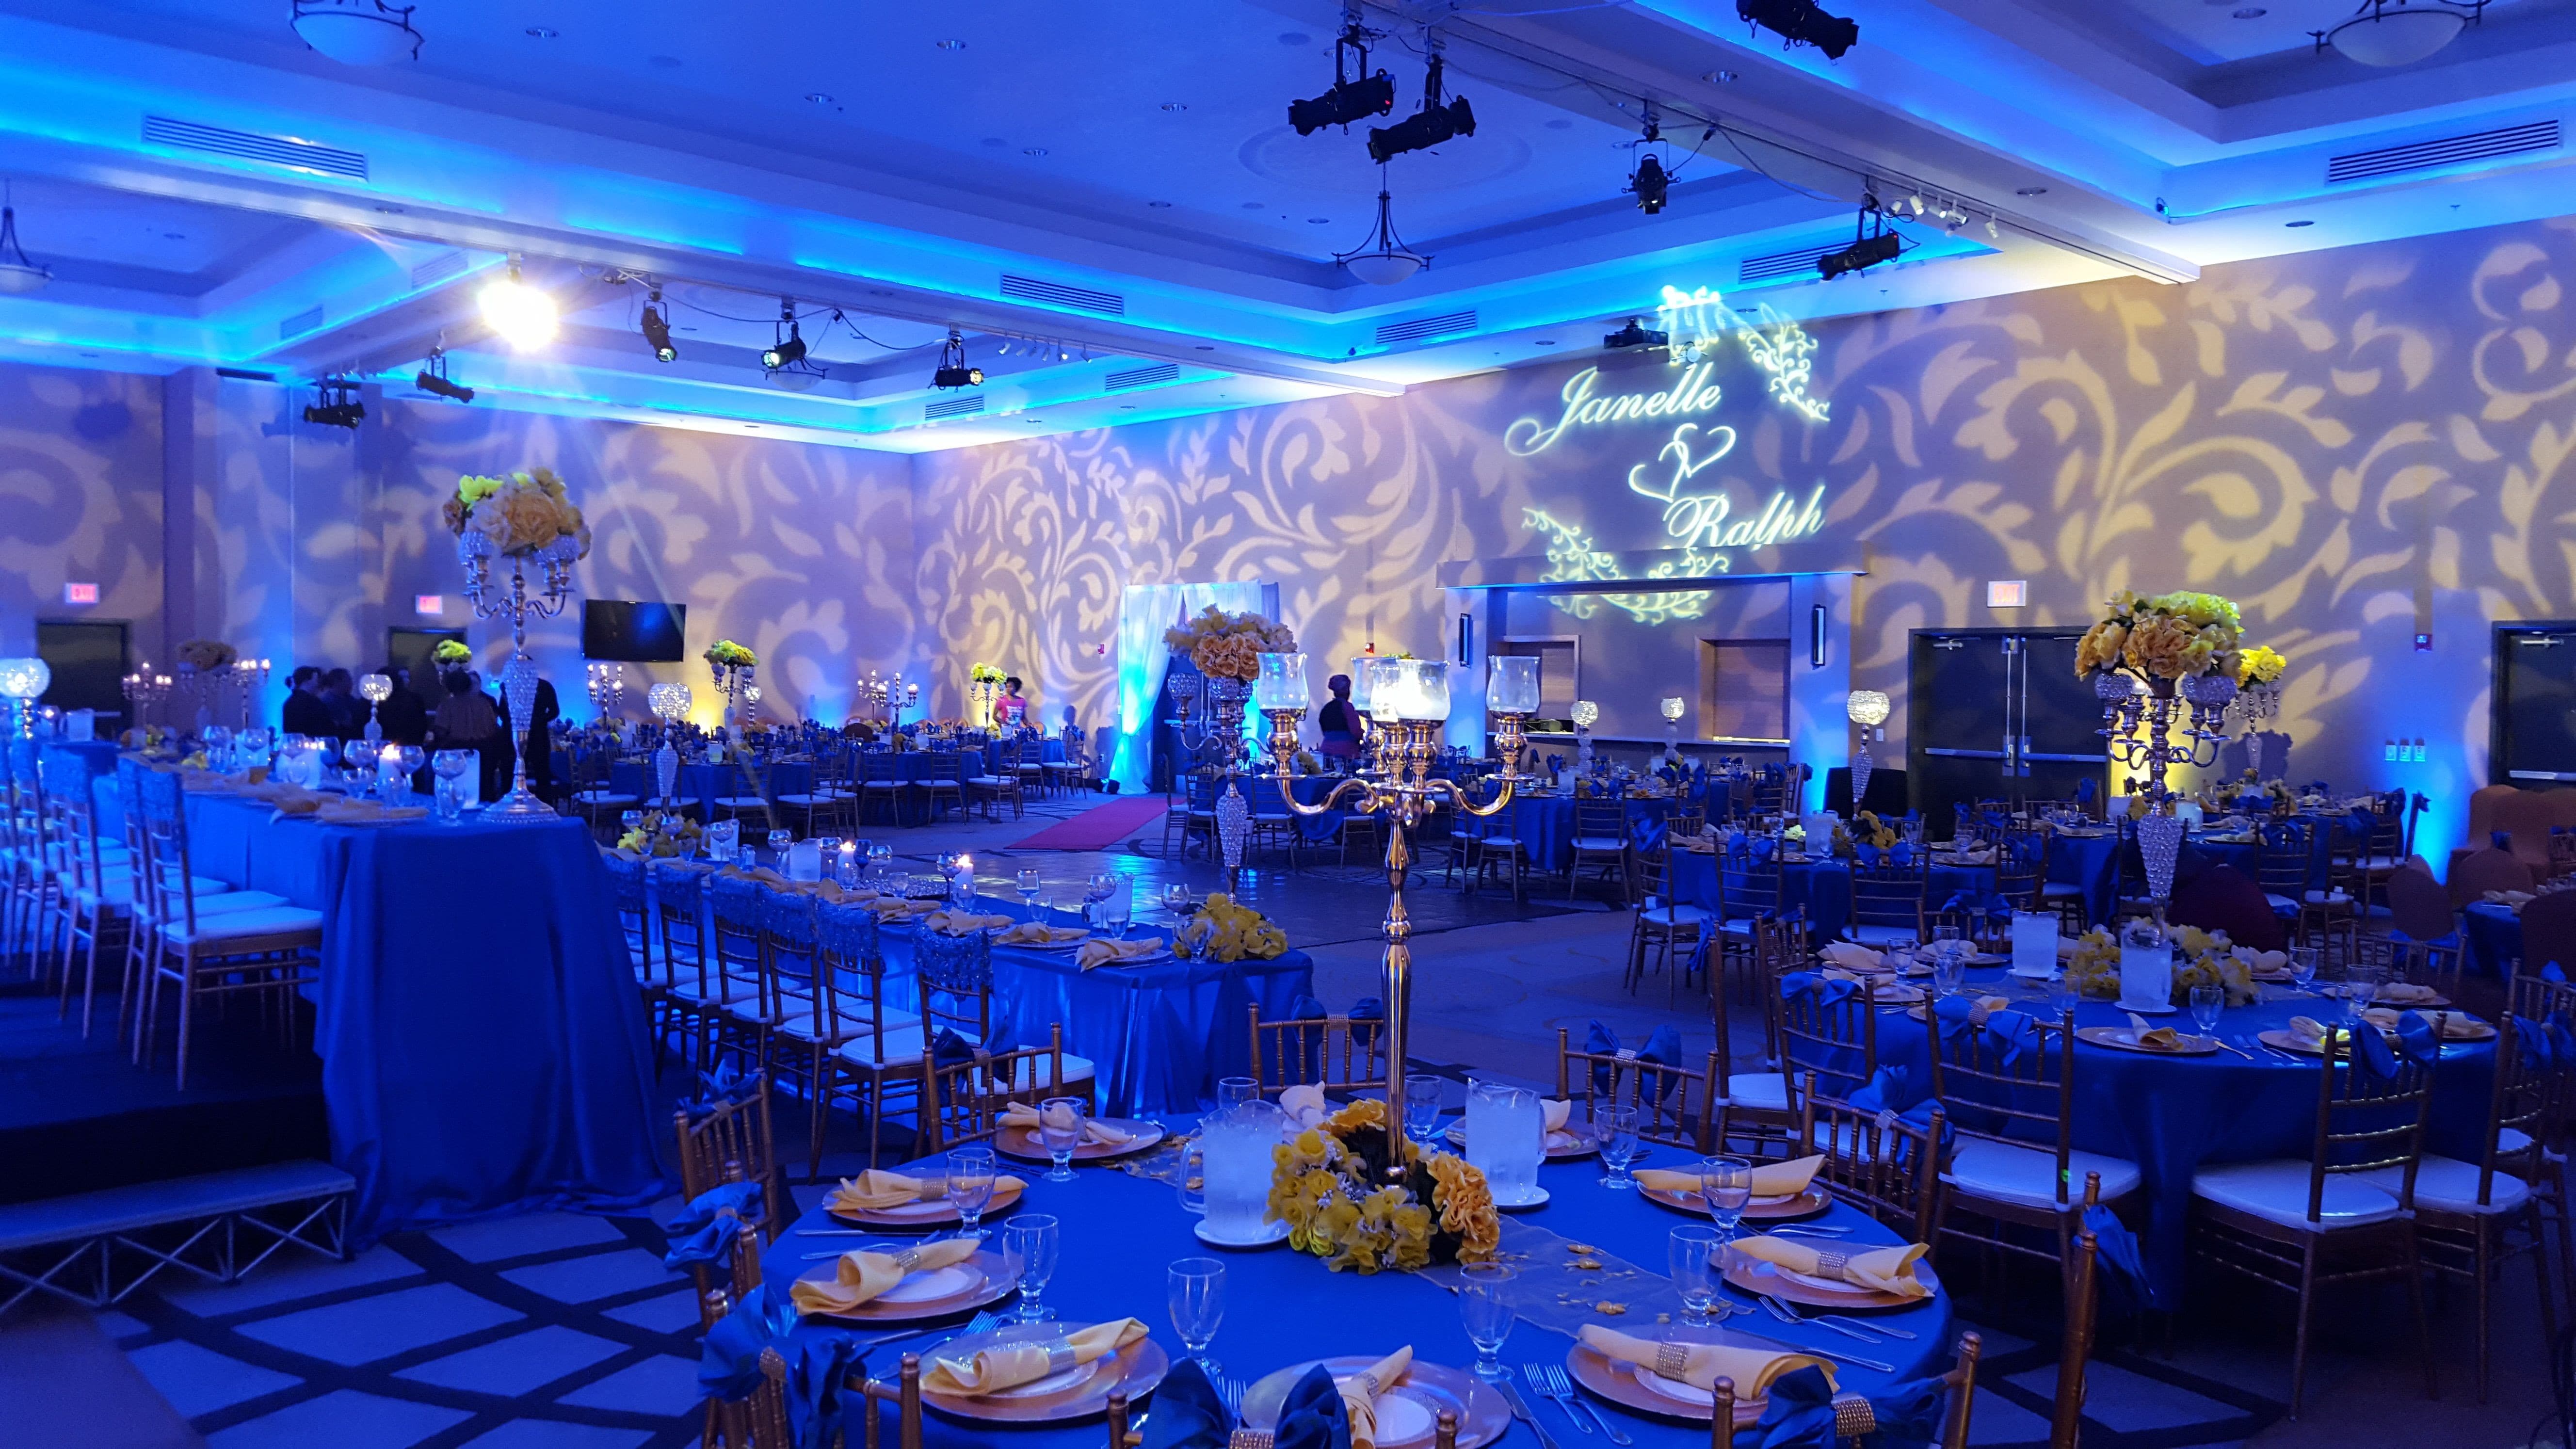 Hilton Doubletree in Fargo, ND. Wedding lighting in blue and yellow with fancy gobo patterns on the walls.